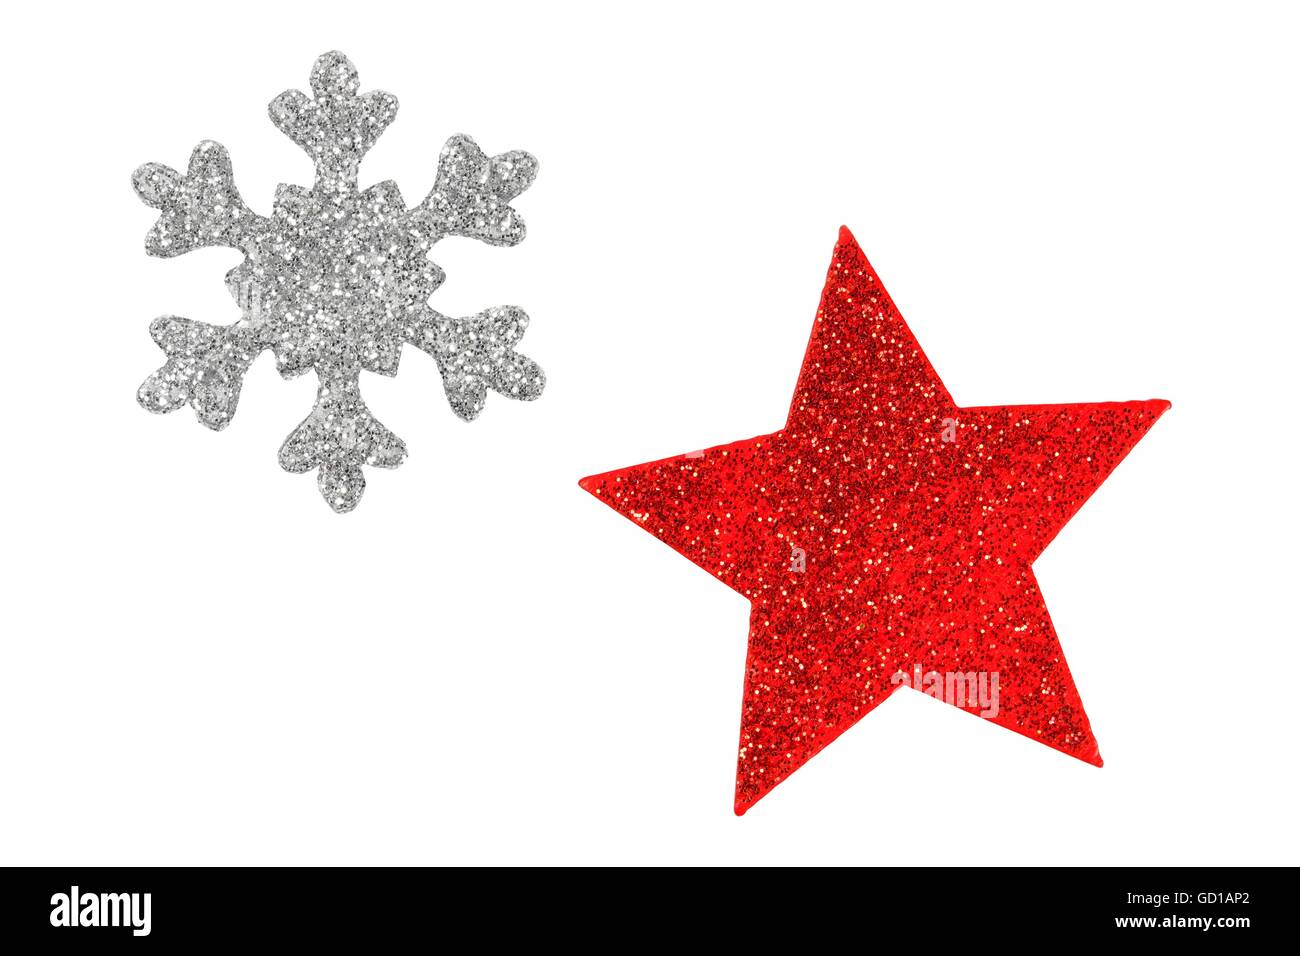 Two Christmas tree stars isolated on white background Stock Photo